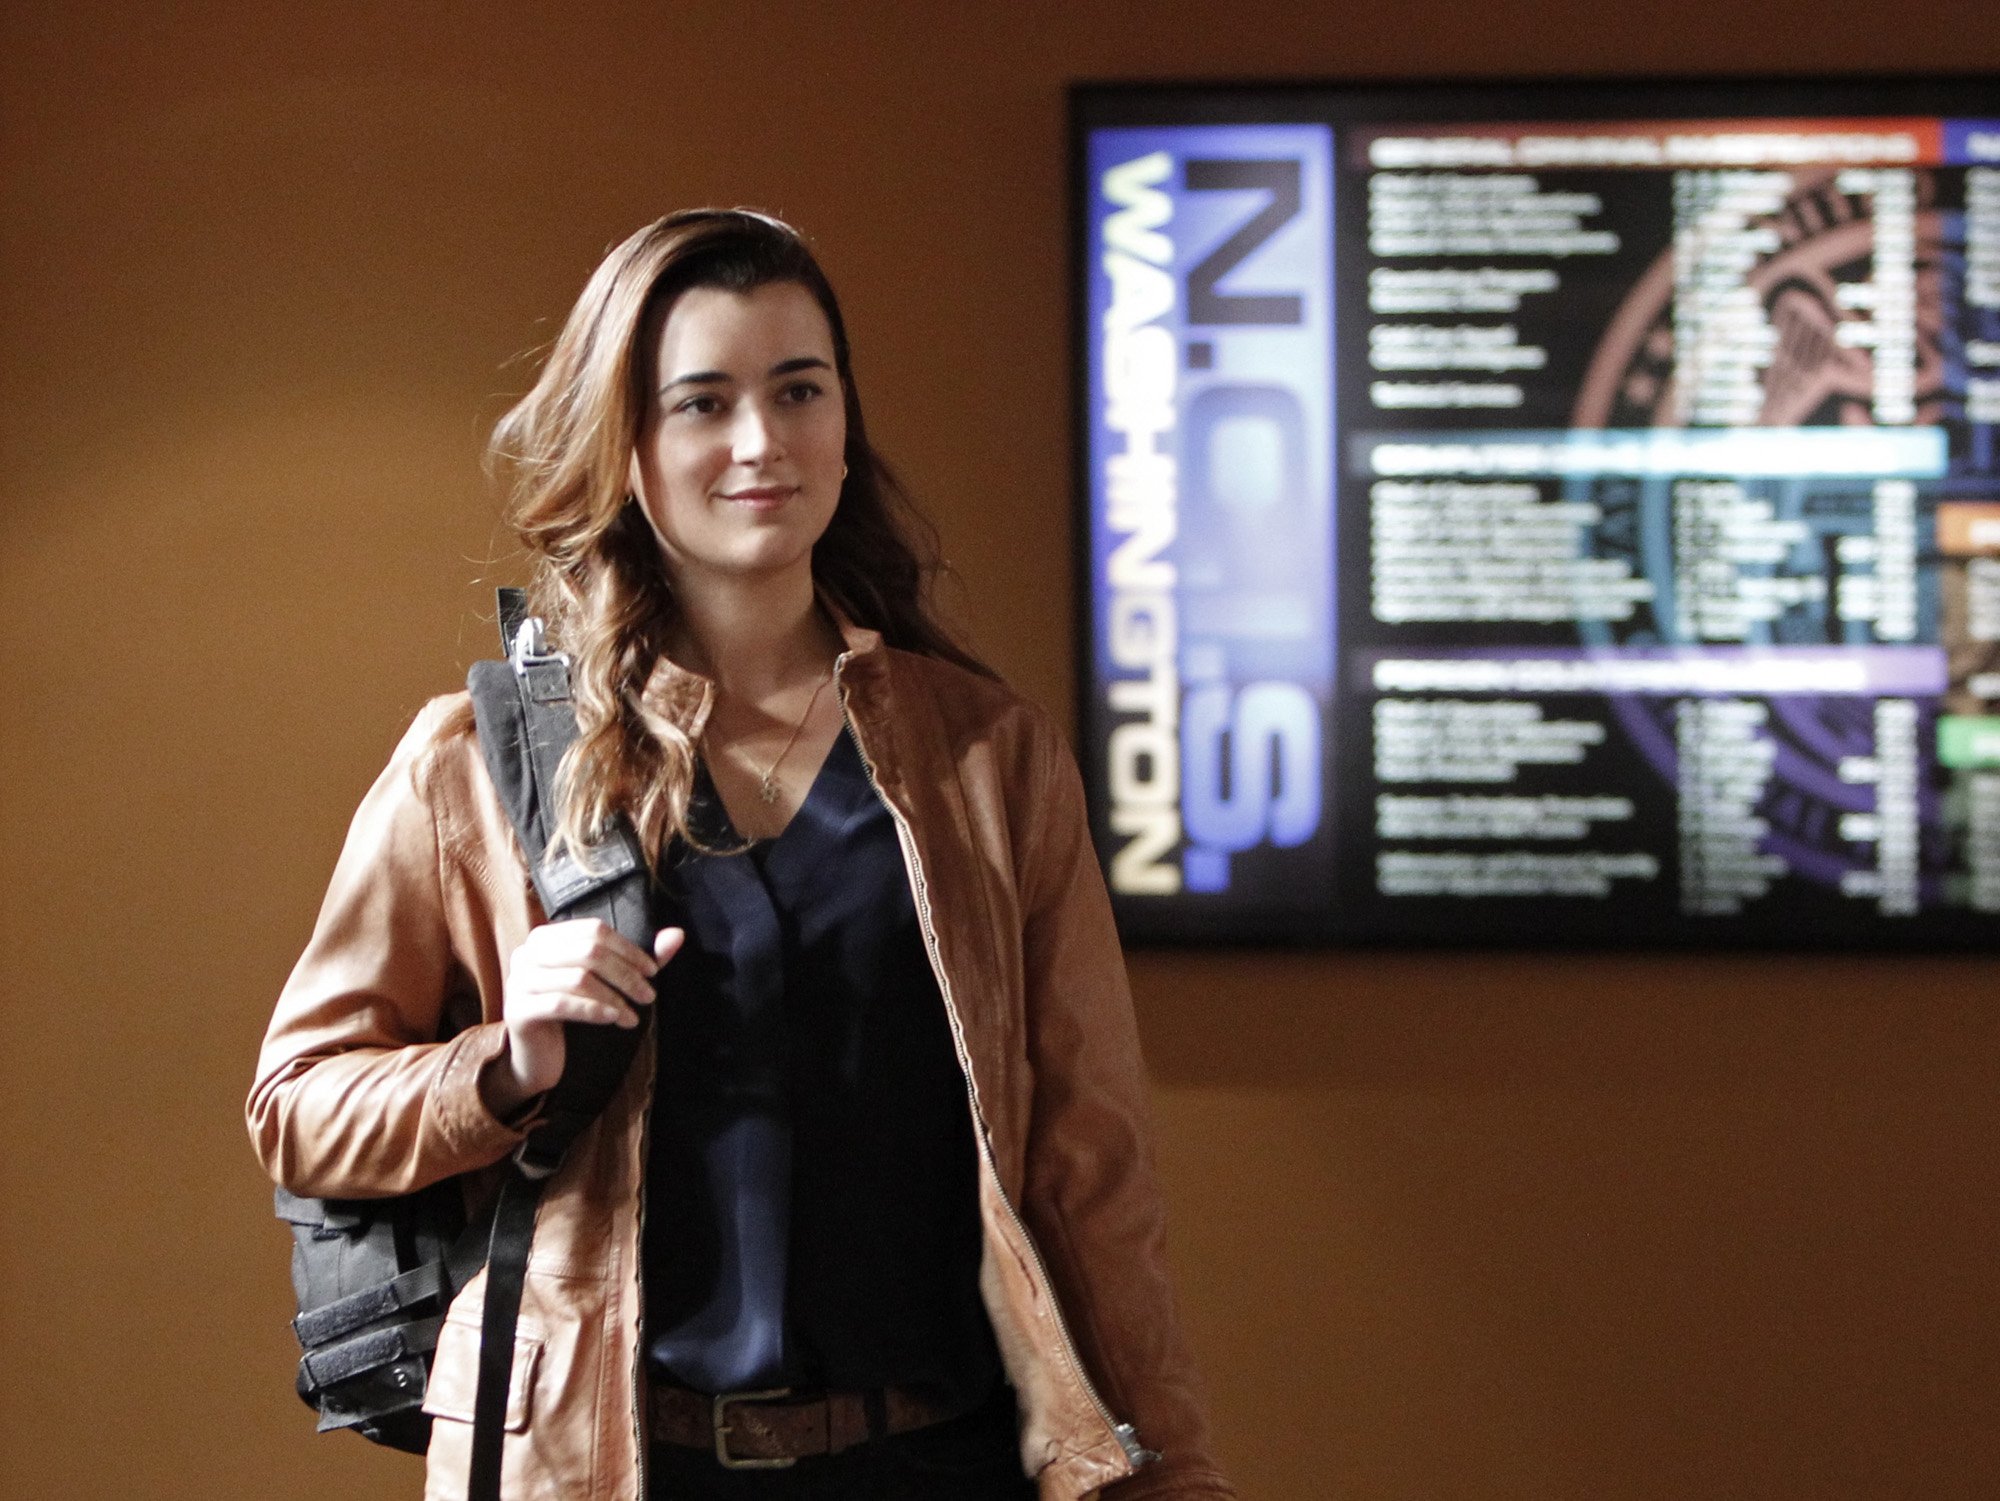 Cote de Pablo on the set of "NCIS" in 2013 | Source: Getty Images